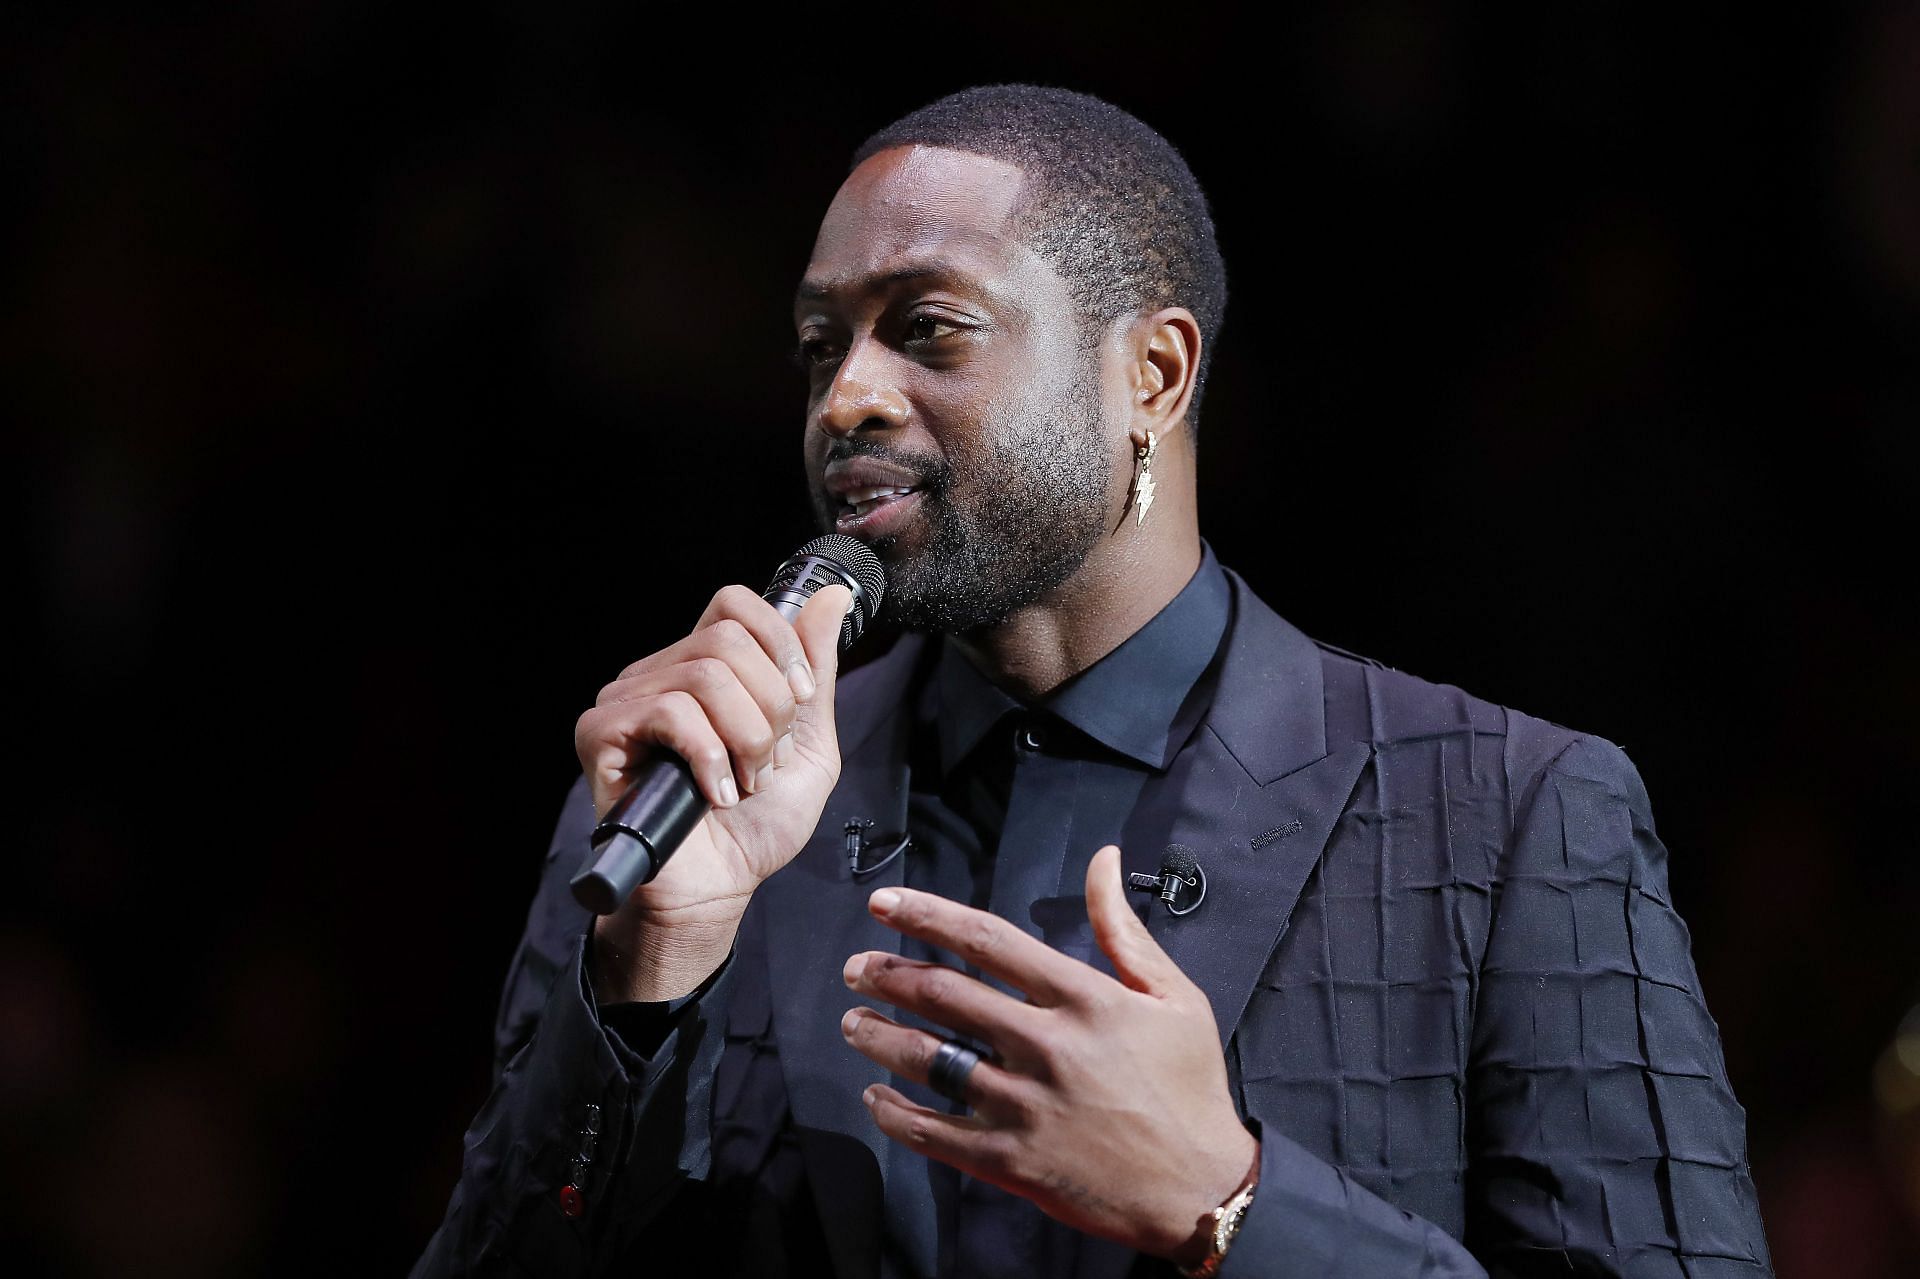 Dwayne Wade's All-Star Tenure Ends With A Whimper